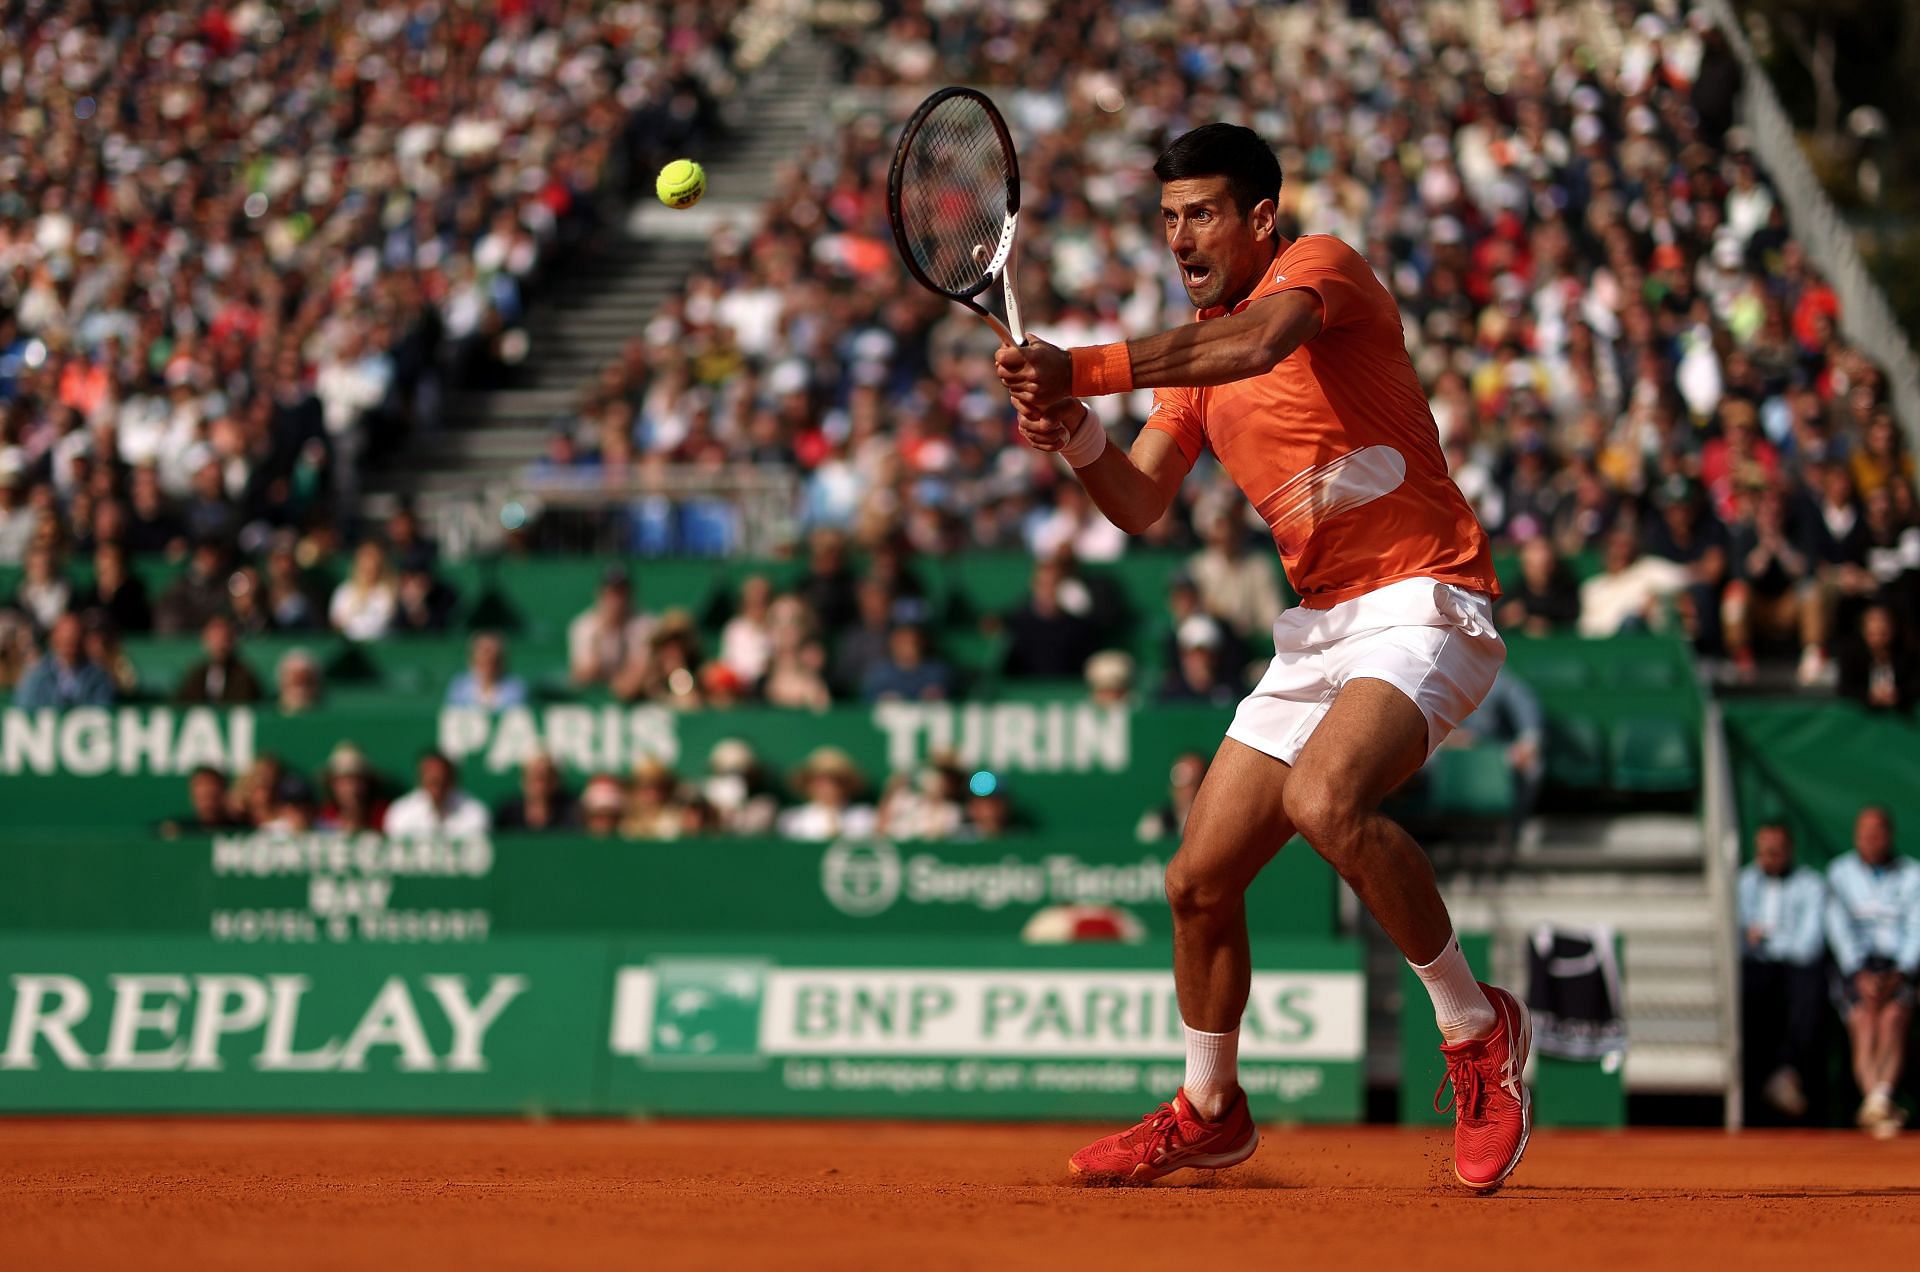 Novak Djokovic got knocked out in the second round of the Monte-Carlo Masters